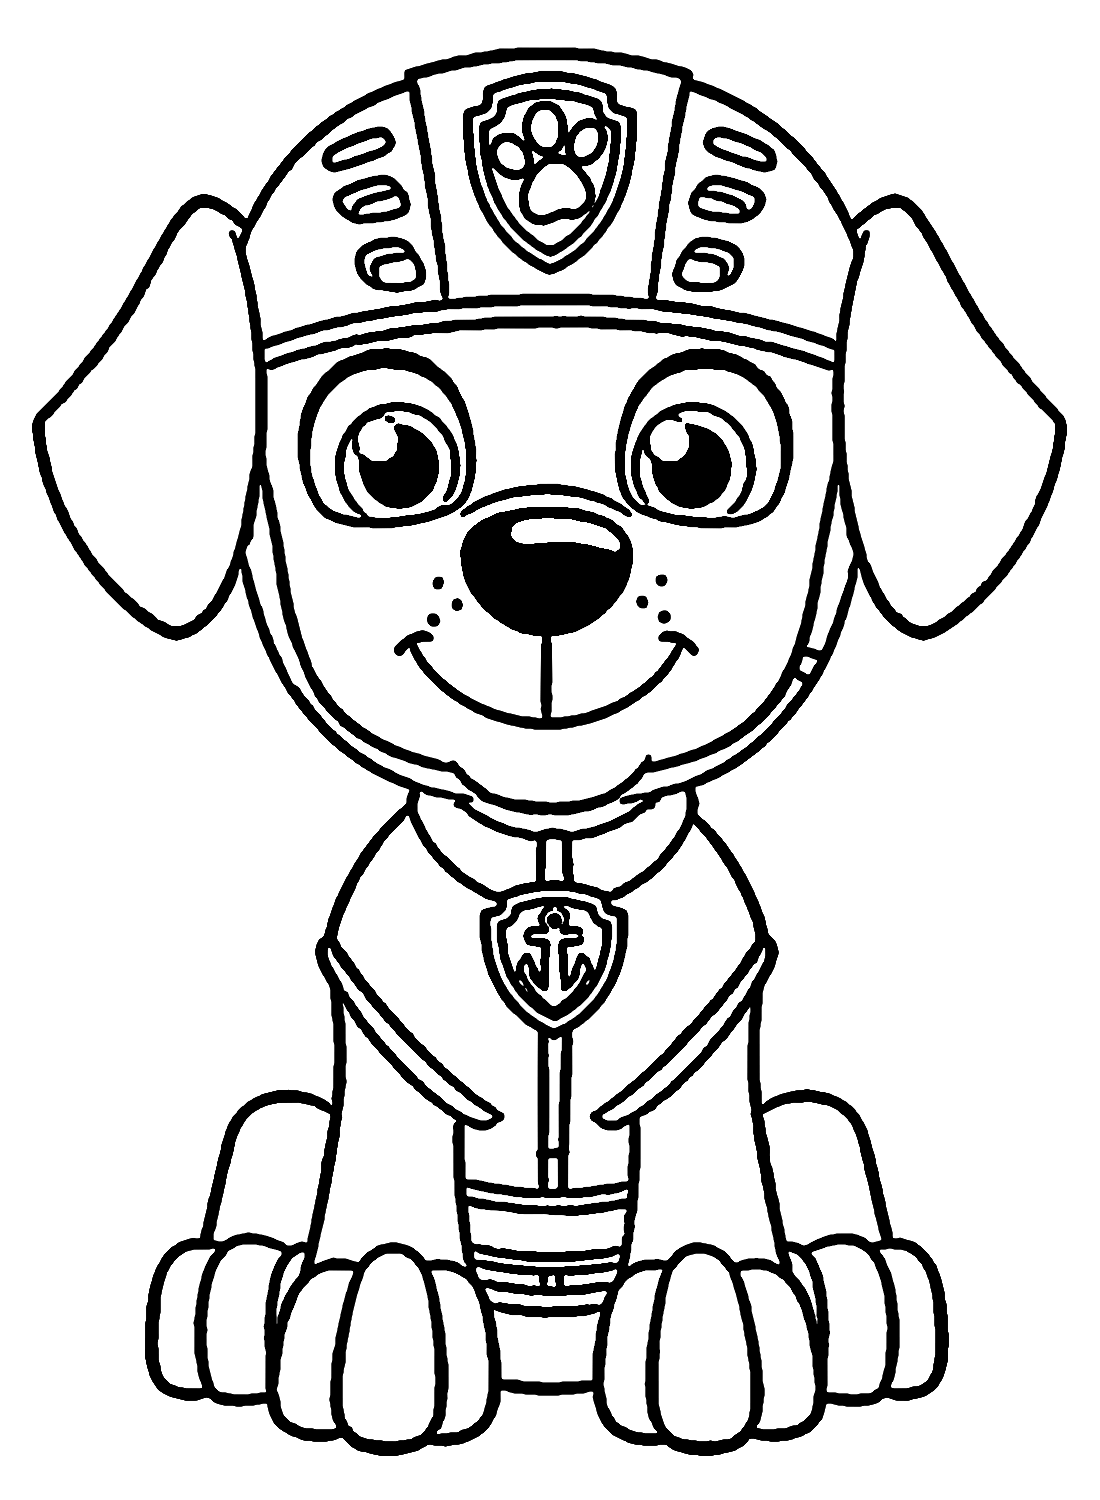 Cute Zuma from Paw Patrol Coloring Pages